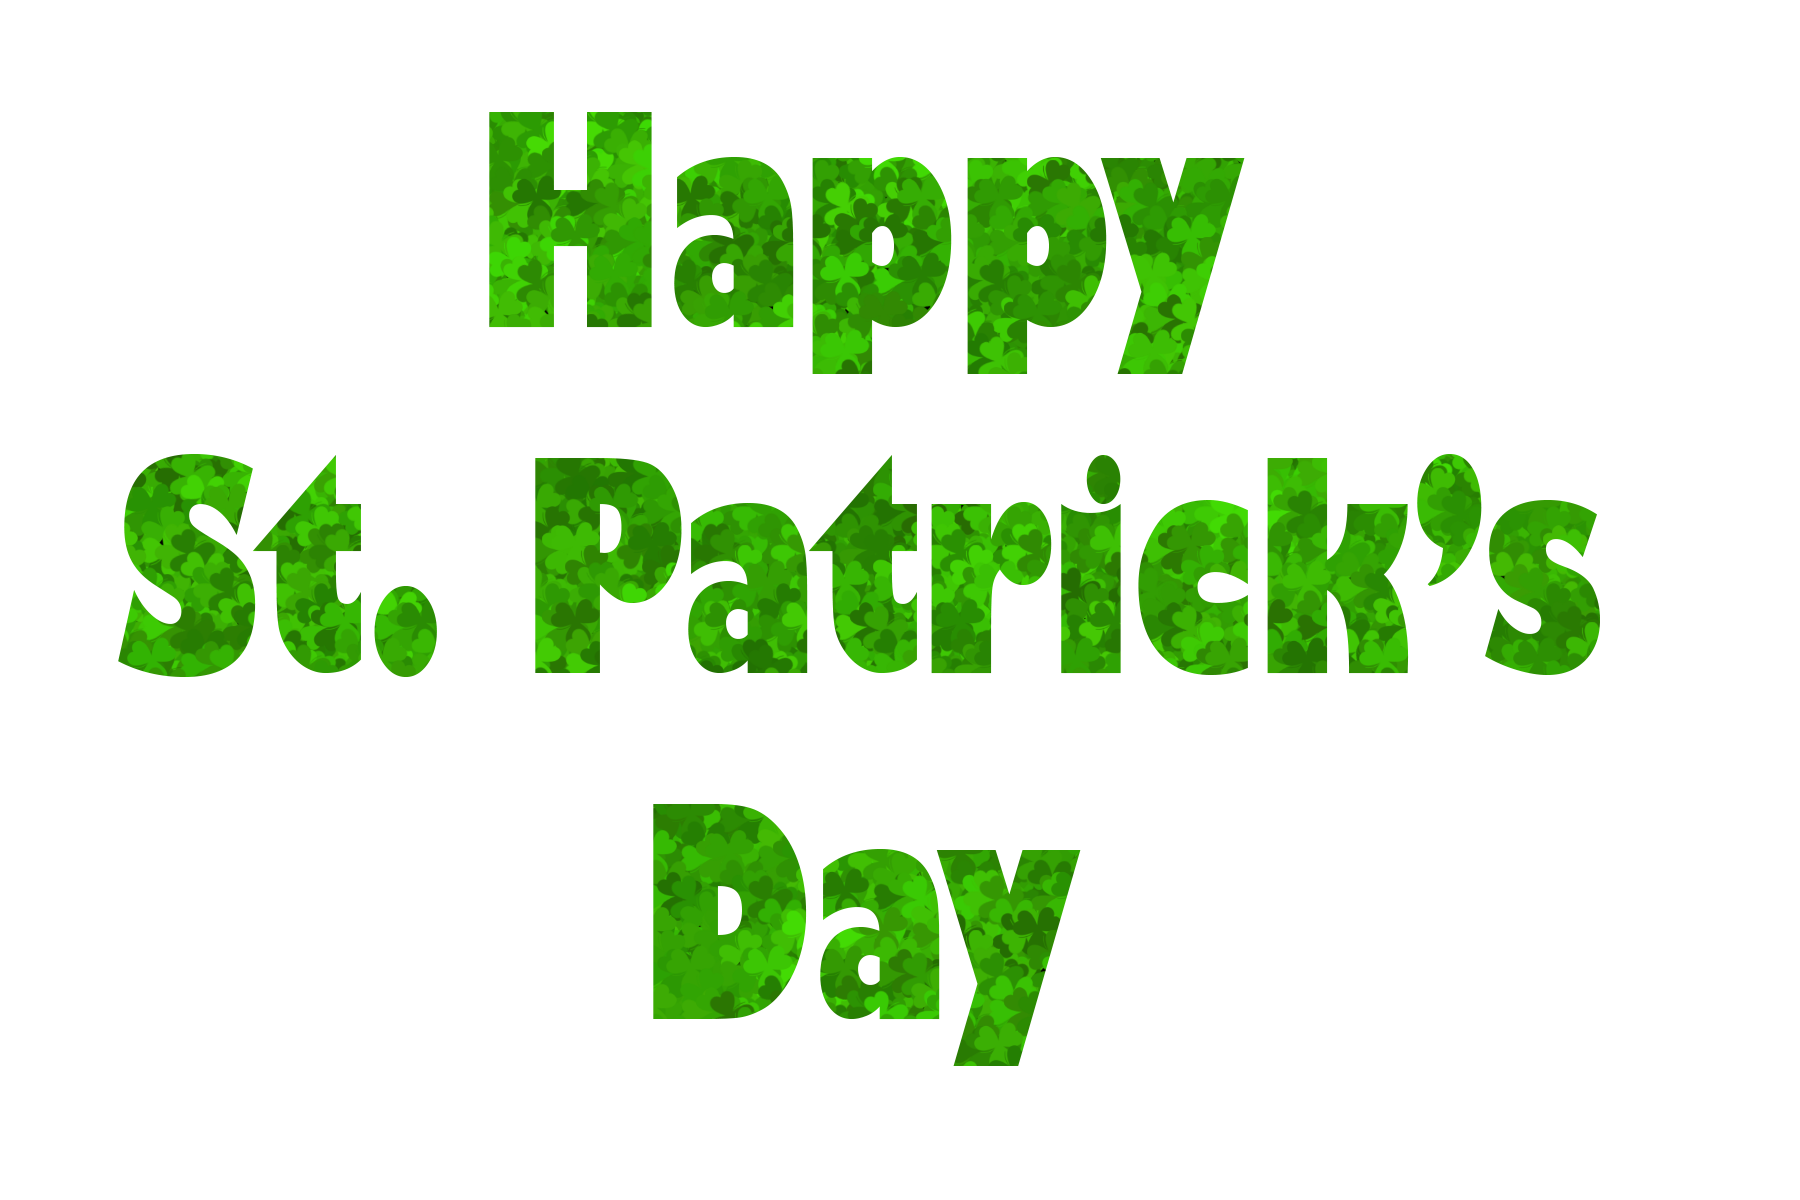 Happy St. Patricks day Simple Text PNG